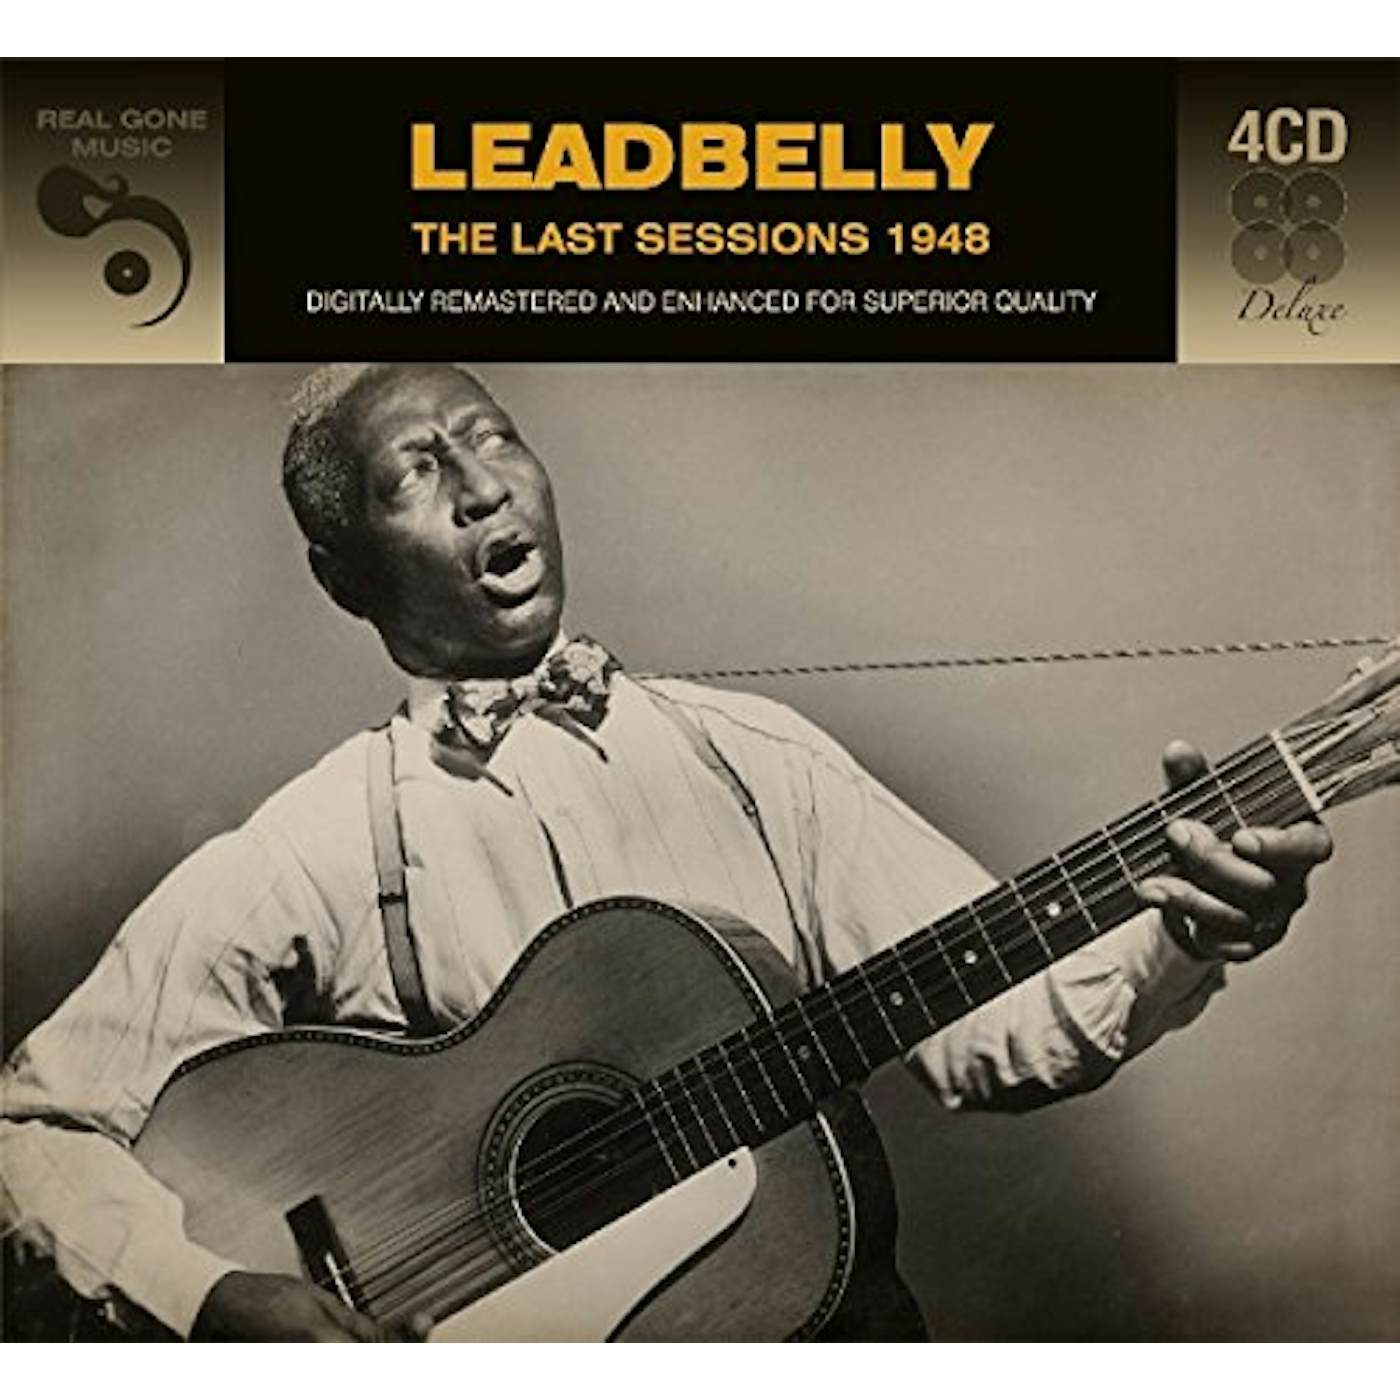 Leadbelly LAST SESSIONS 1948 CD